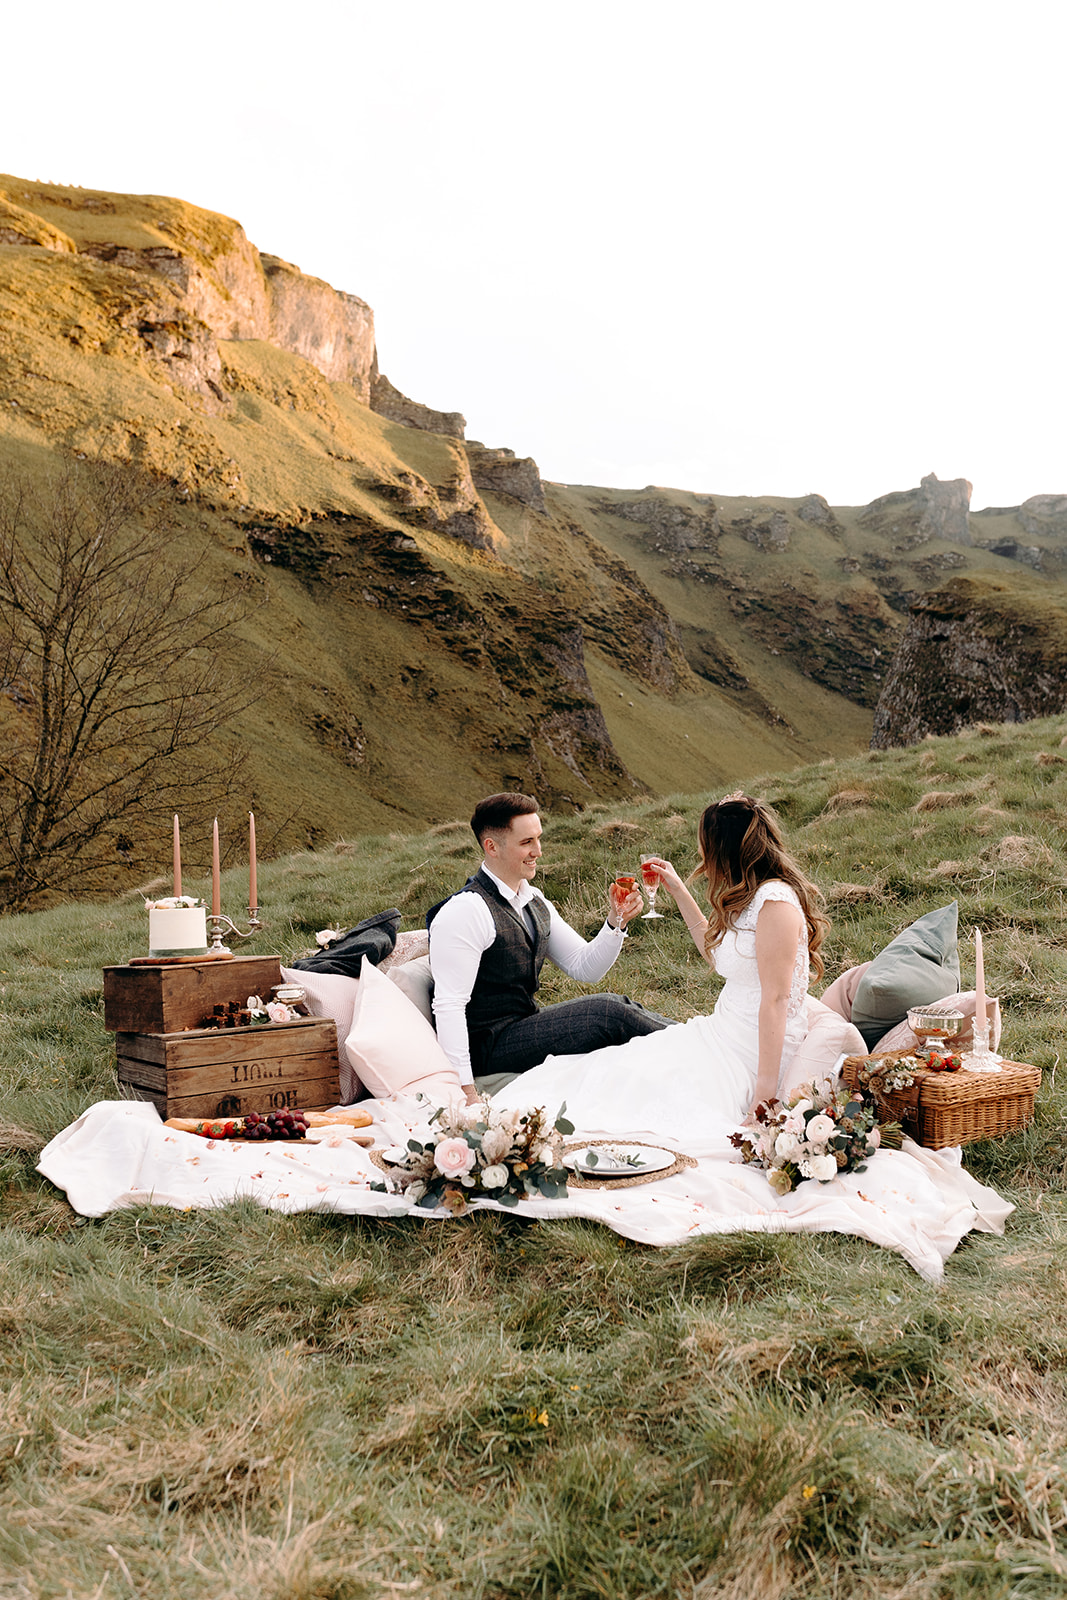 bride and groom having a picnic in the countryside - elopement picnic styling - bohemian elopement